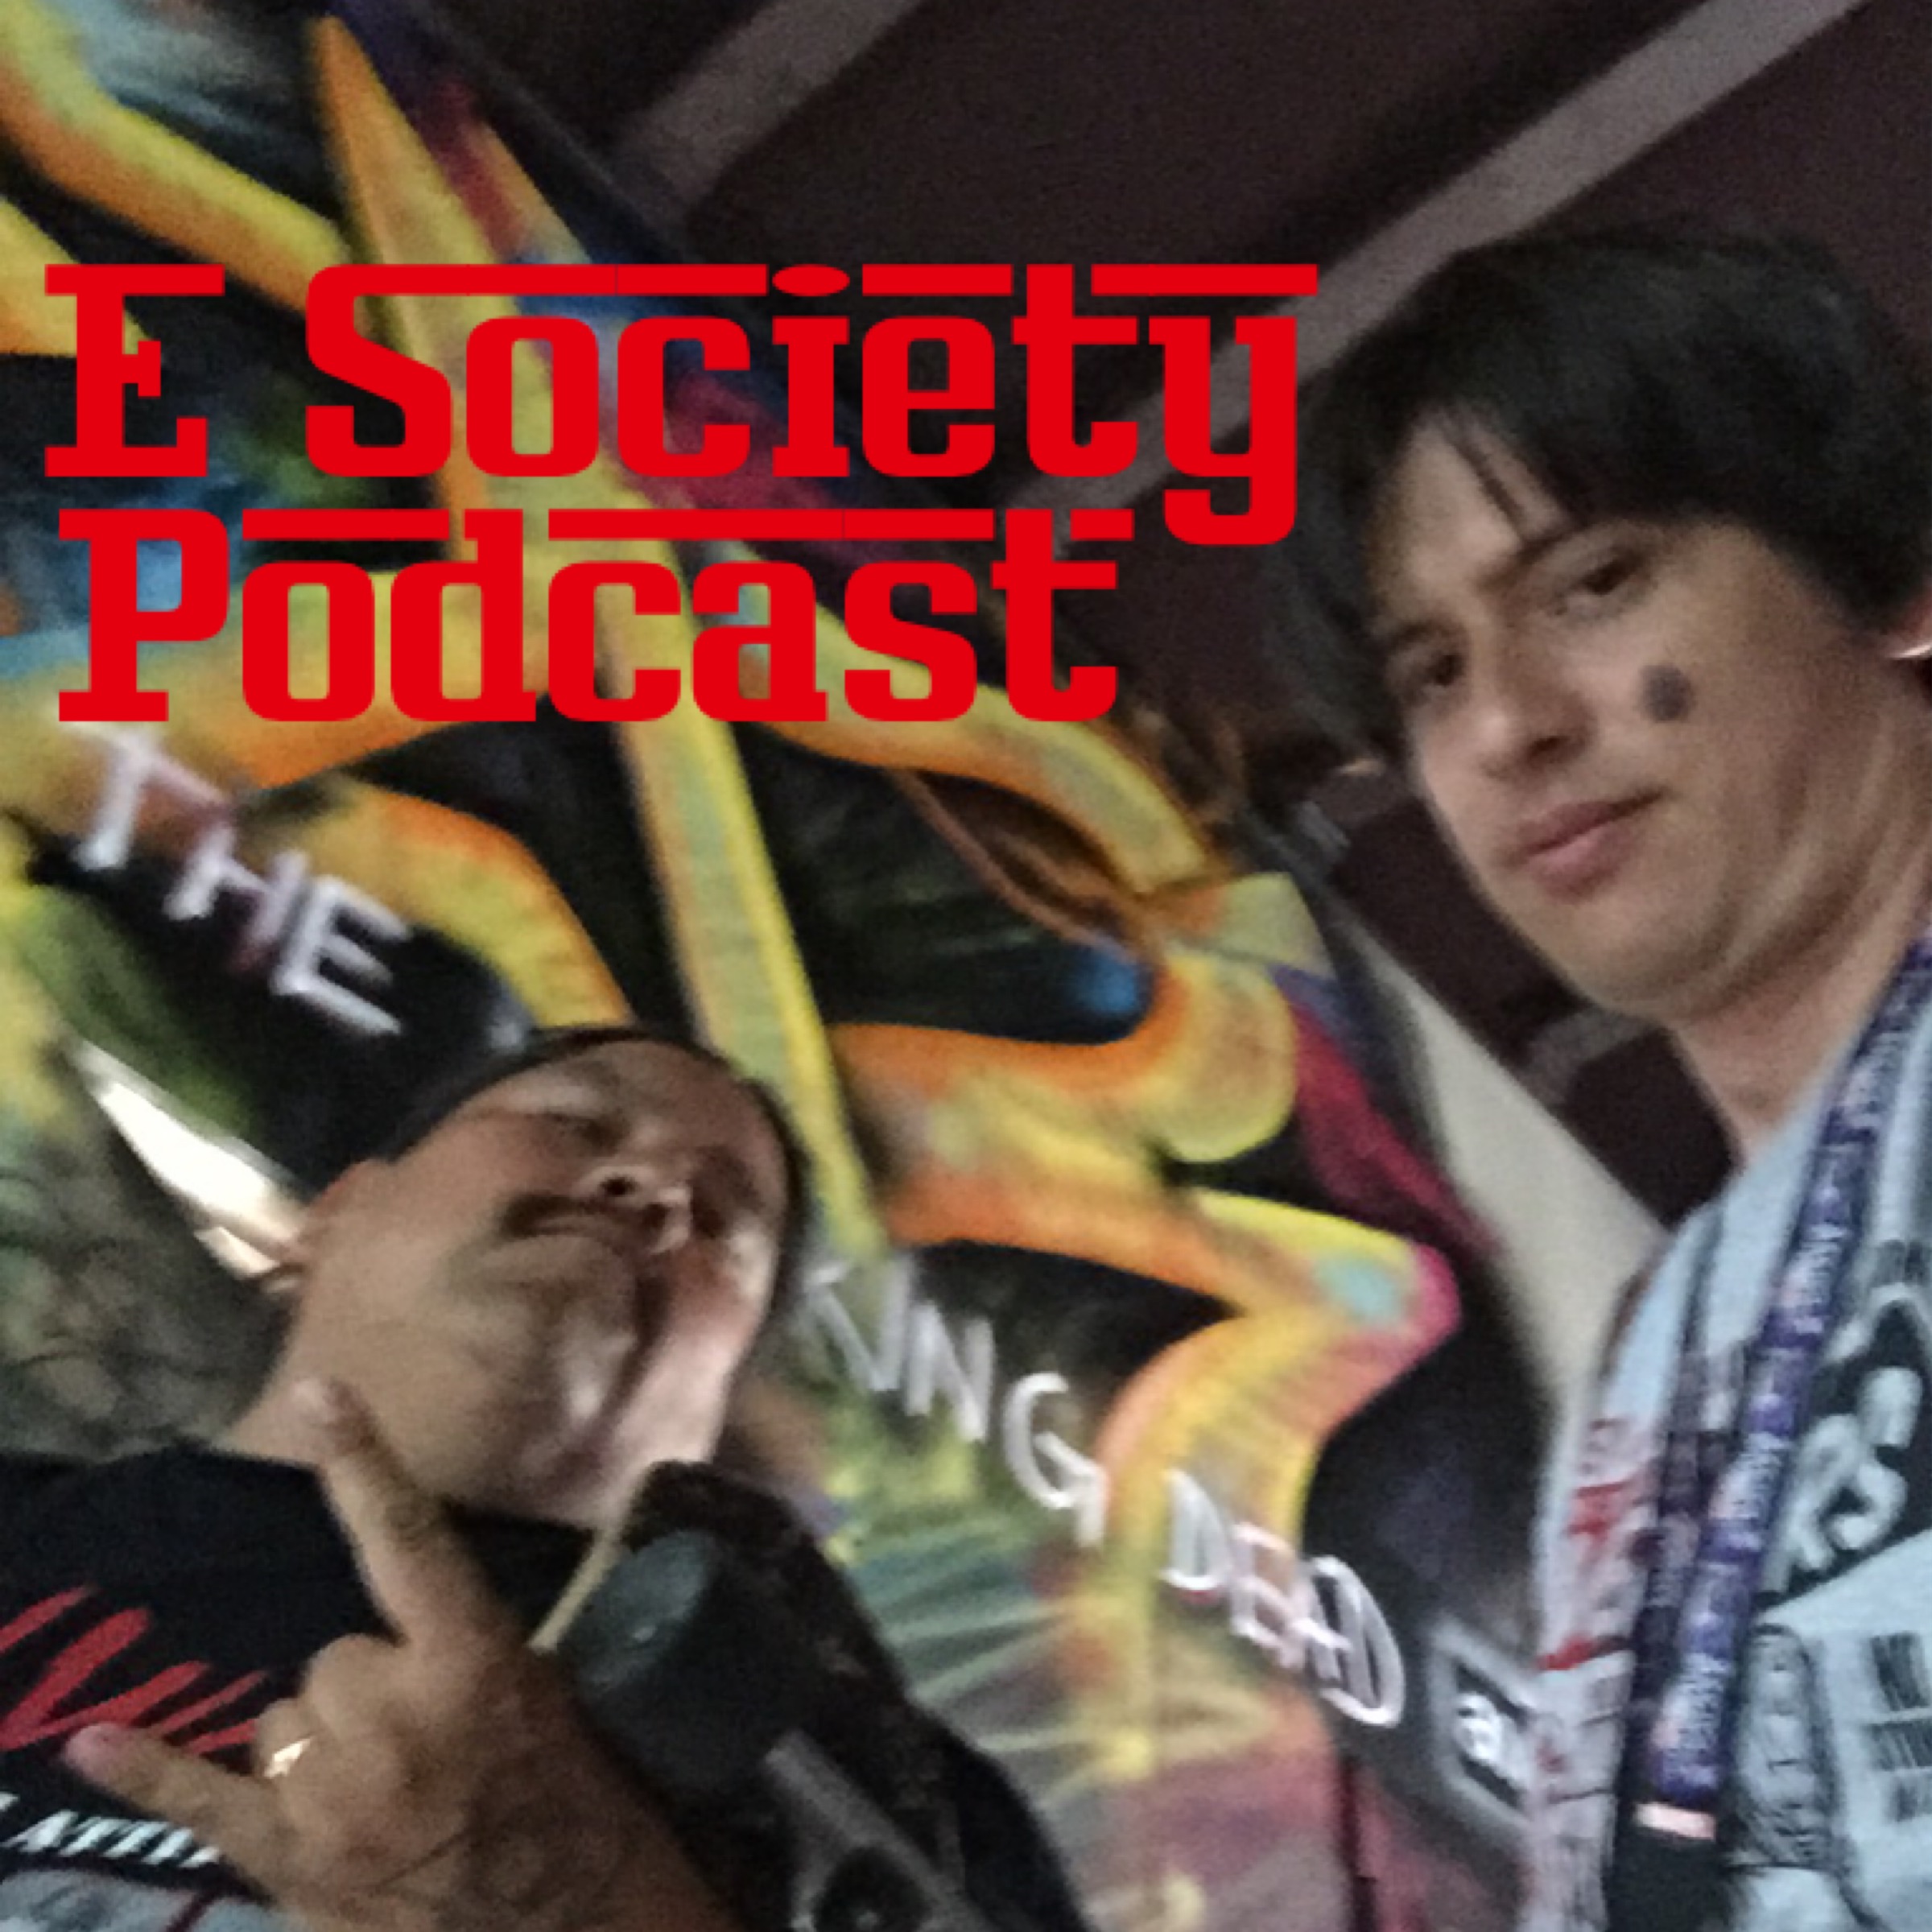 E Society Podcast - Ep. 51: Mr. Bay ruined my childhood